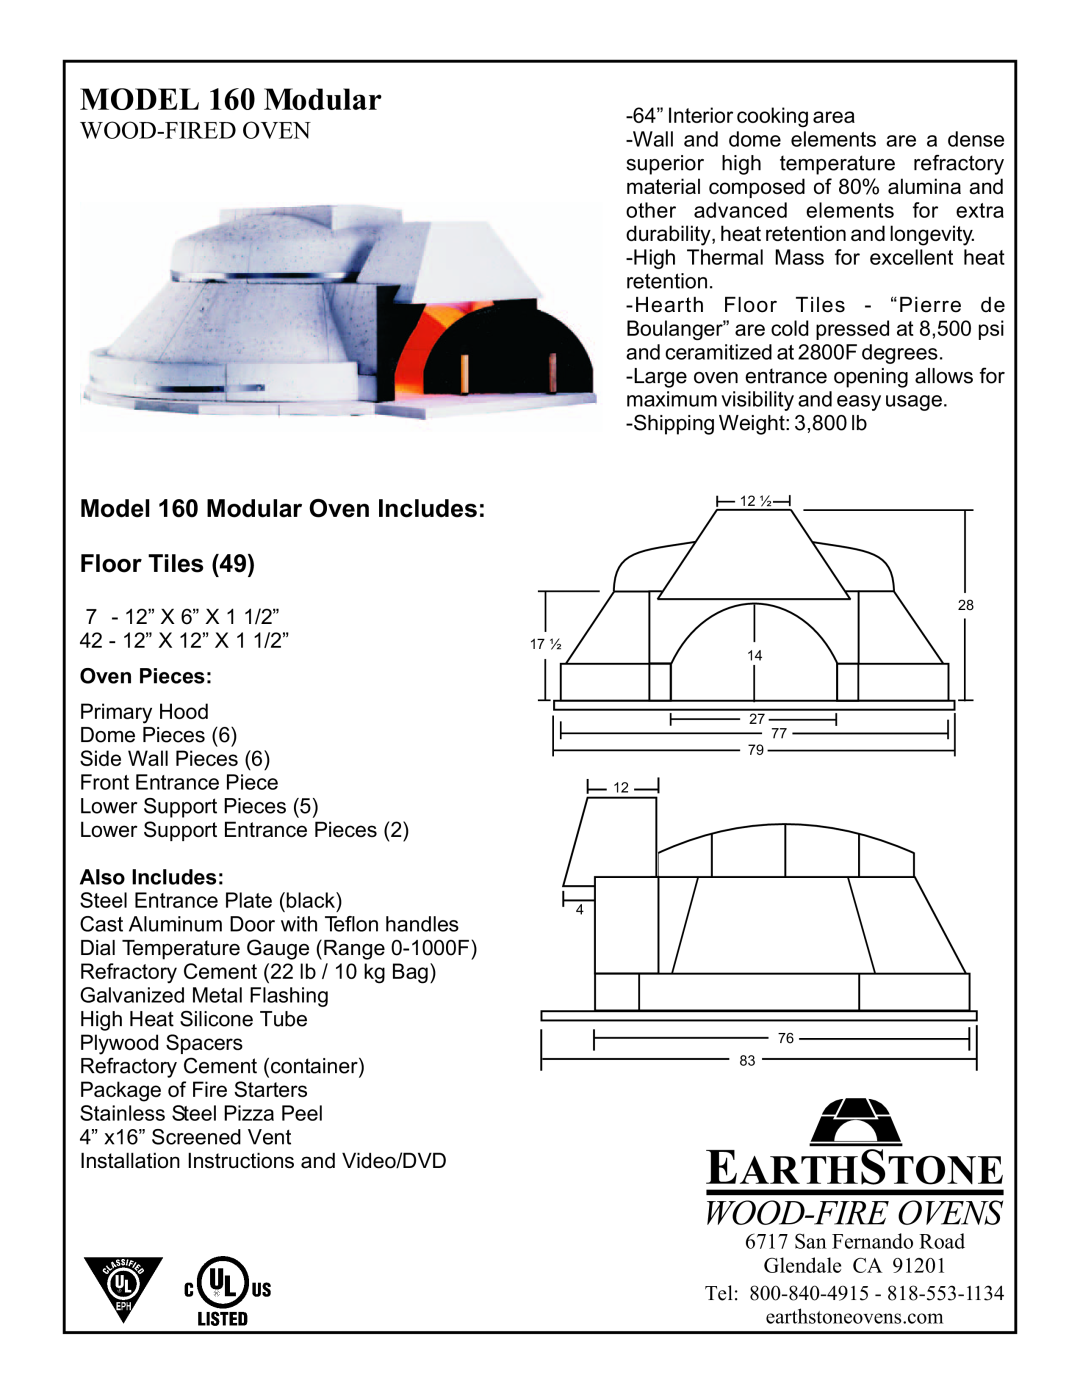 EarthStone installation instructions Earthstone, Wood-Fire Ovens, MODEL 160 Modular, Wood-Fired Oven, Oven Pieces 